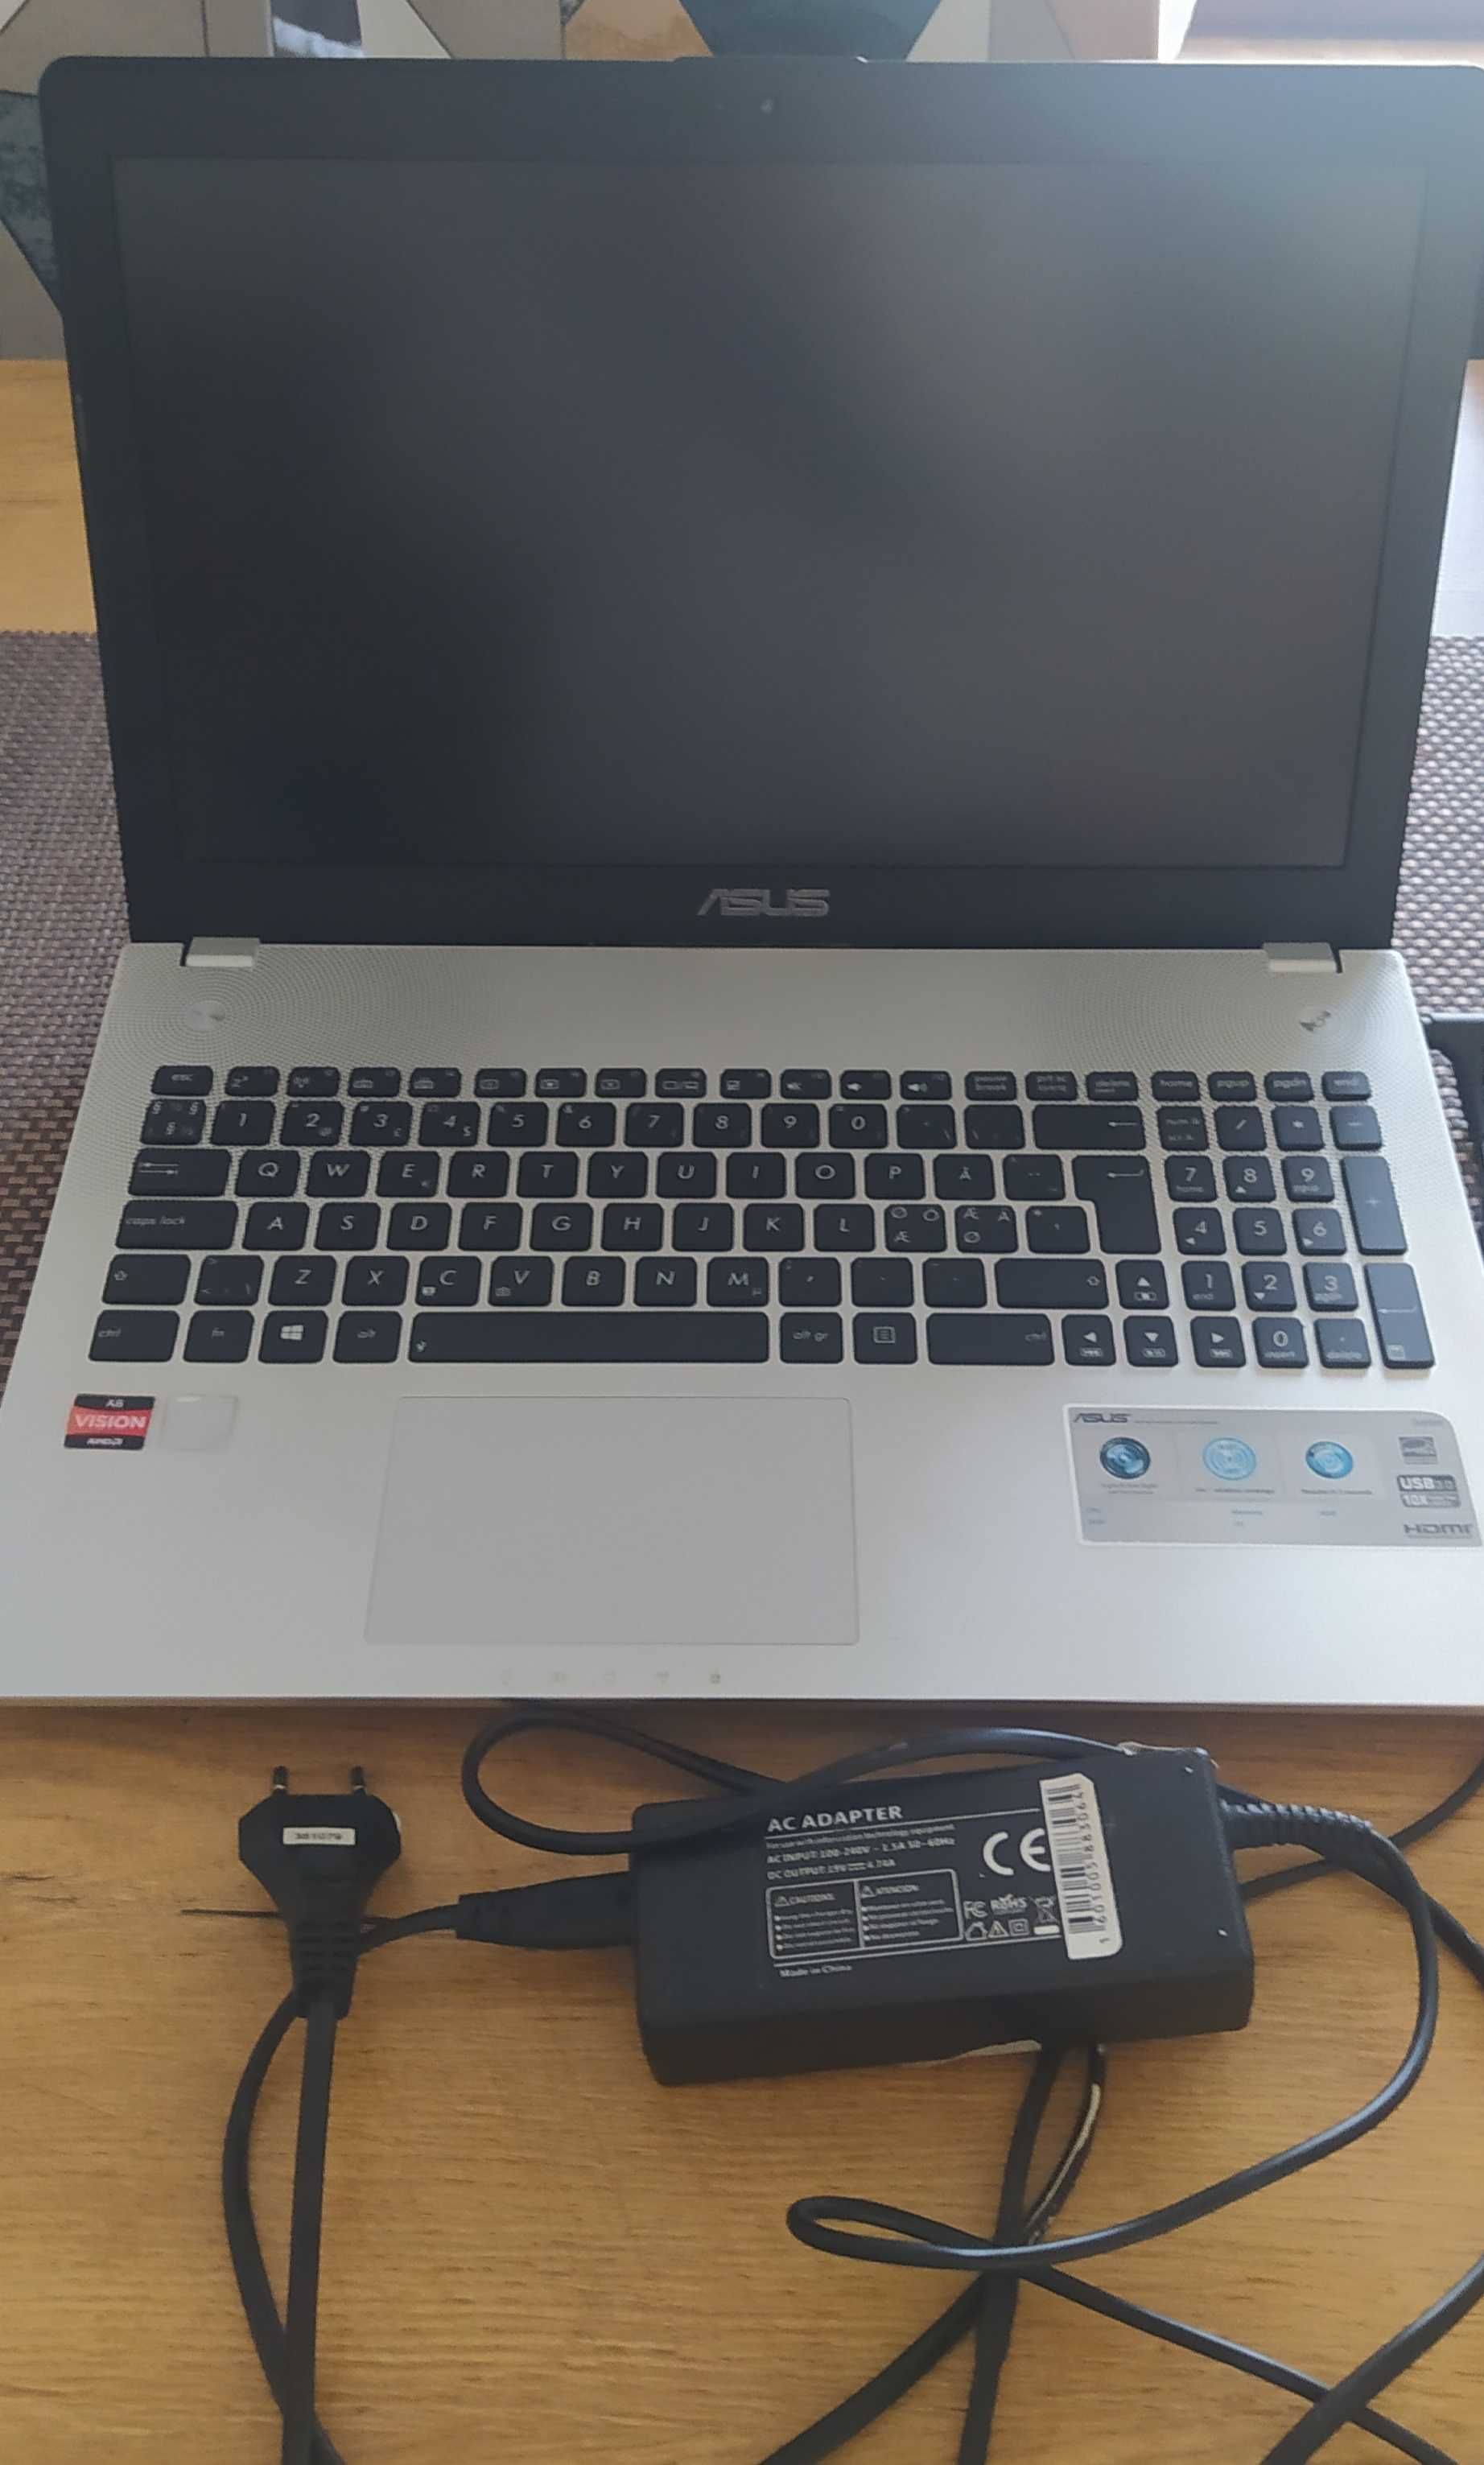 Laptop ASUS - AMD A8-5550M APU with Radeon(tm) HD Graphics 2.10 GHz